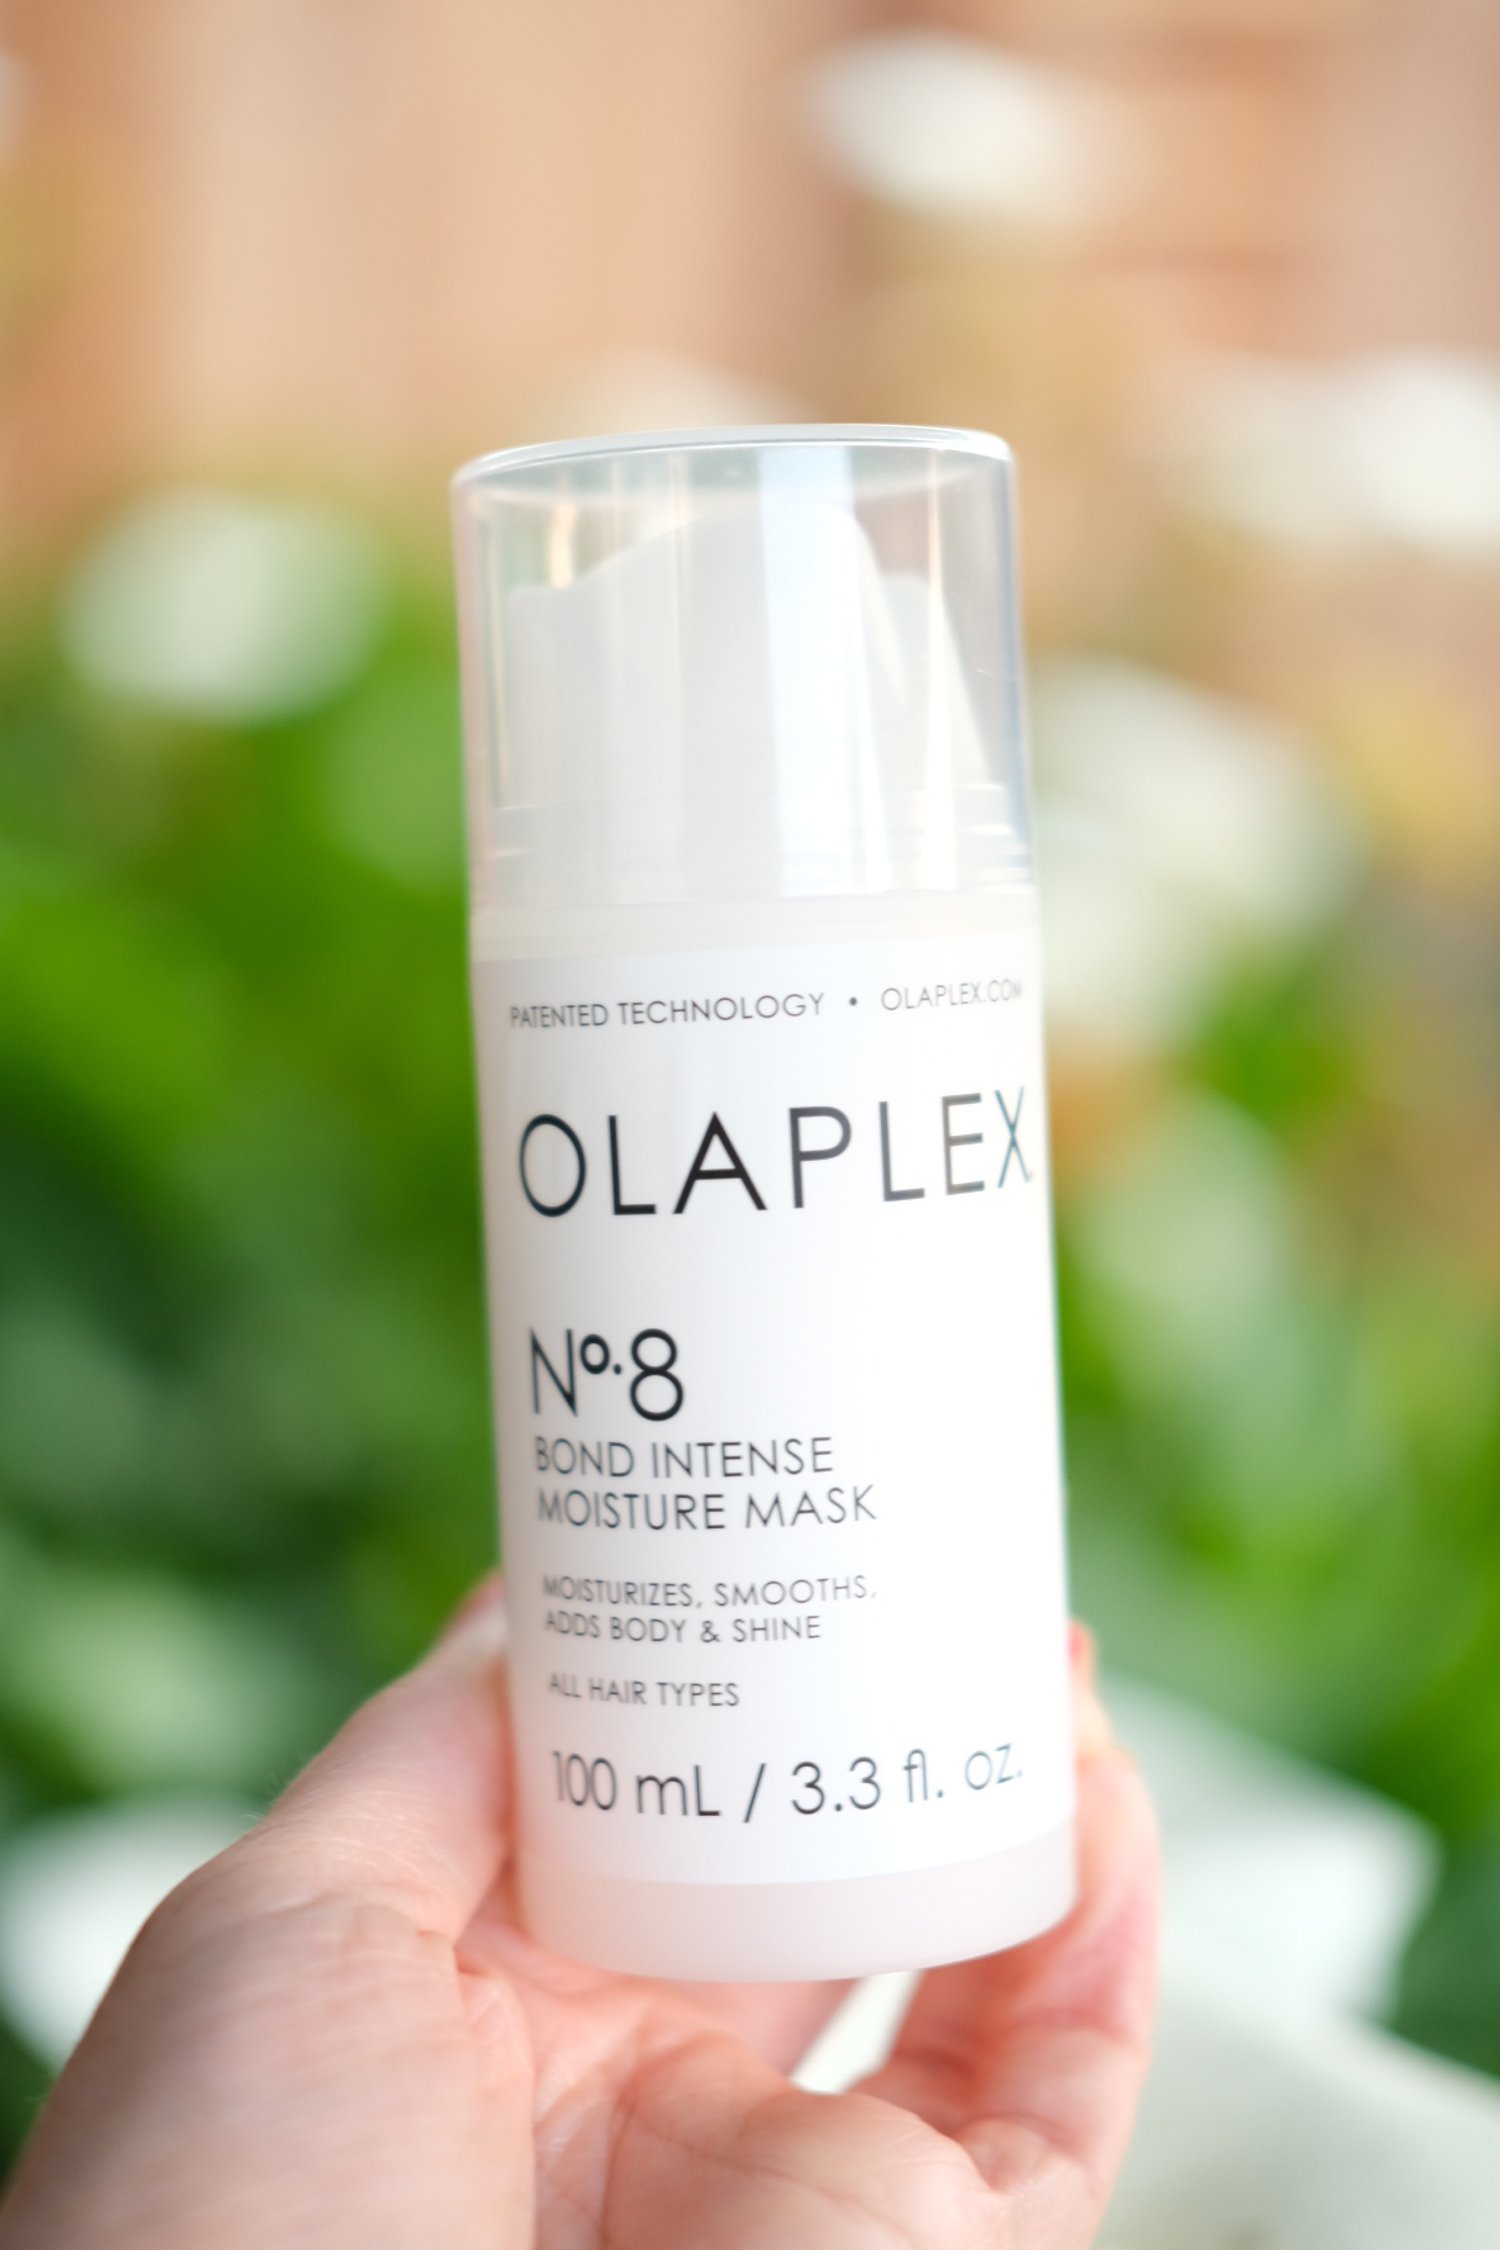 Find out which is the best Olaplex for damaged hair. If you are looking for the best Olaplex products for damaged hair, then you have come to the right place.  In this blog post, I am going to tell you my 2 top Olaplex products for damaged hair. Thes